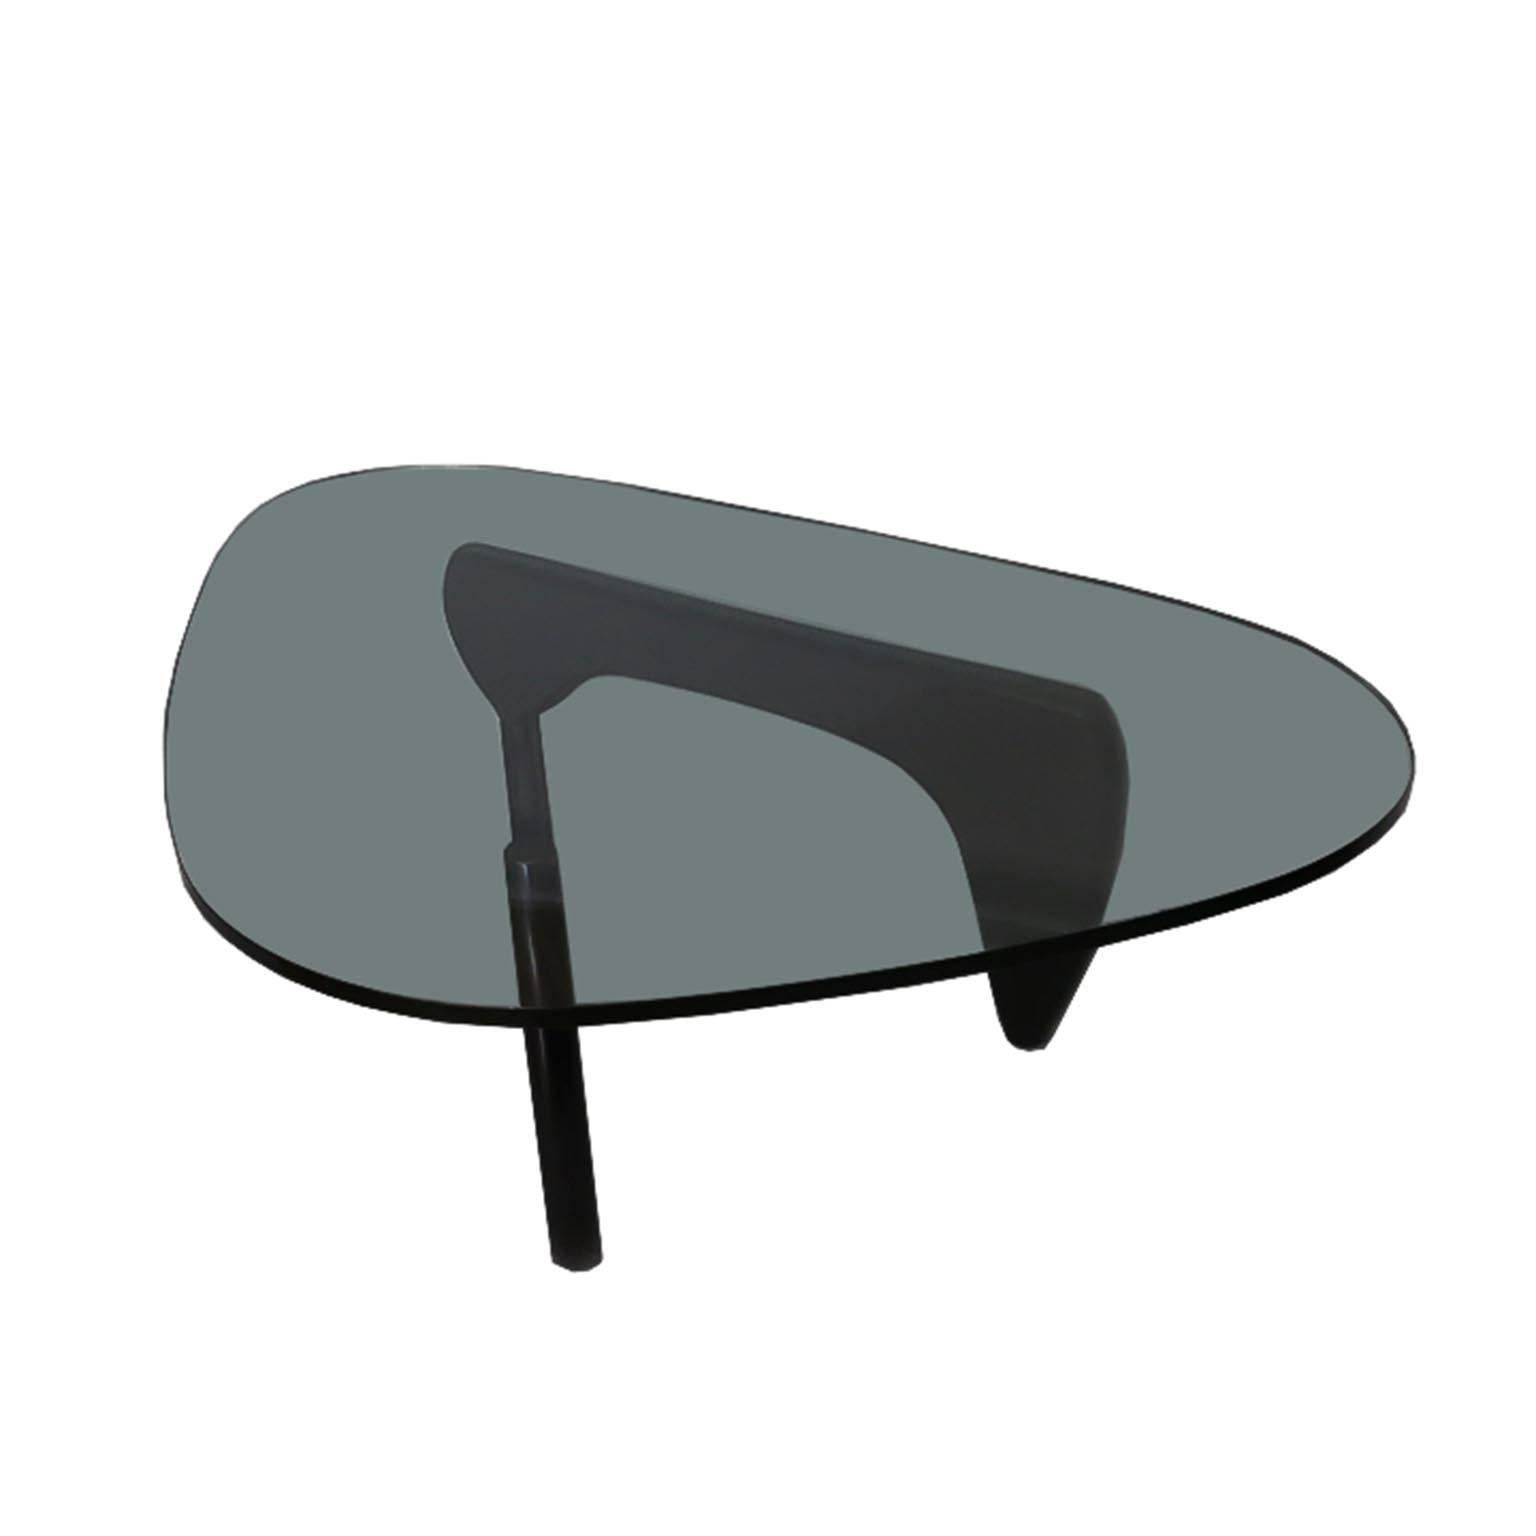 Noguchi coffee table designed by Isamu Noguchi for Herman Miller. Not a reproduction. 
Solid wood base in Noguchi black, 0.75" thick glass with Noguchi signature.